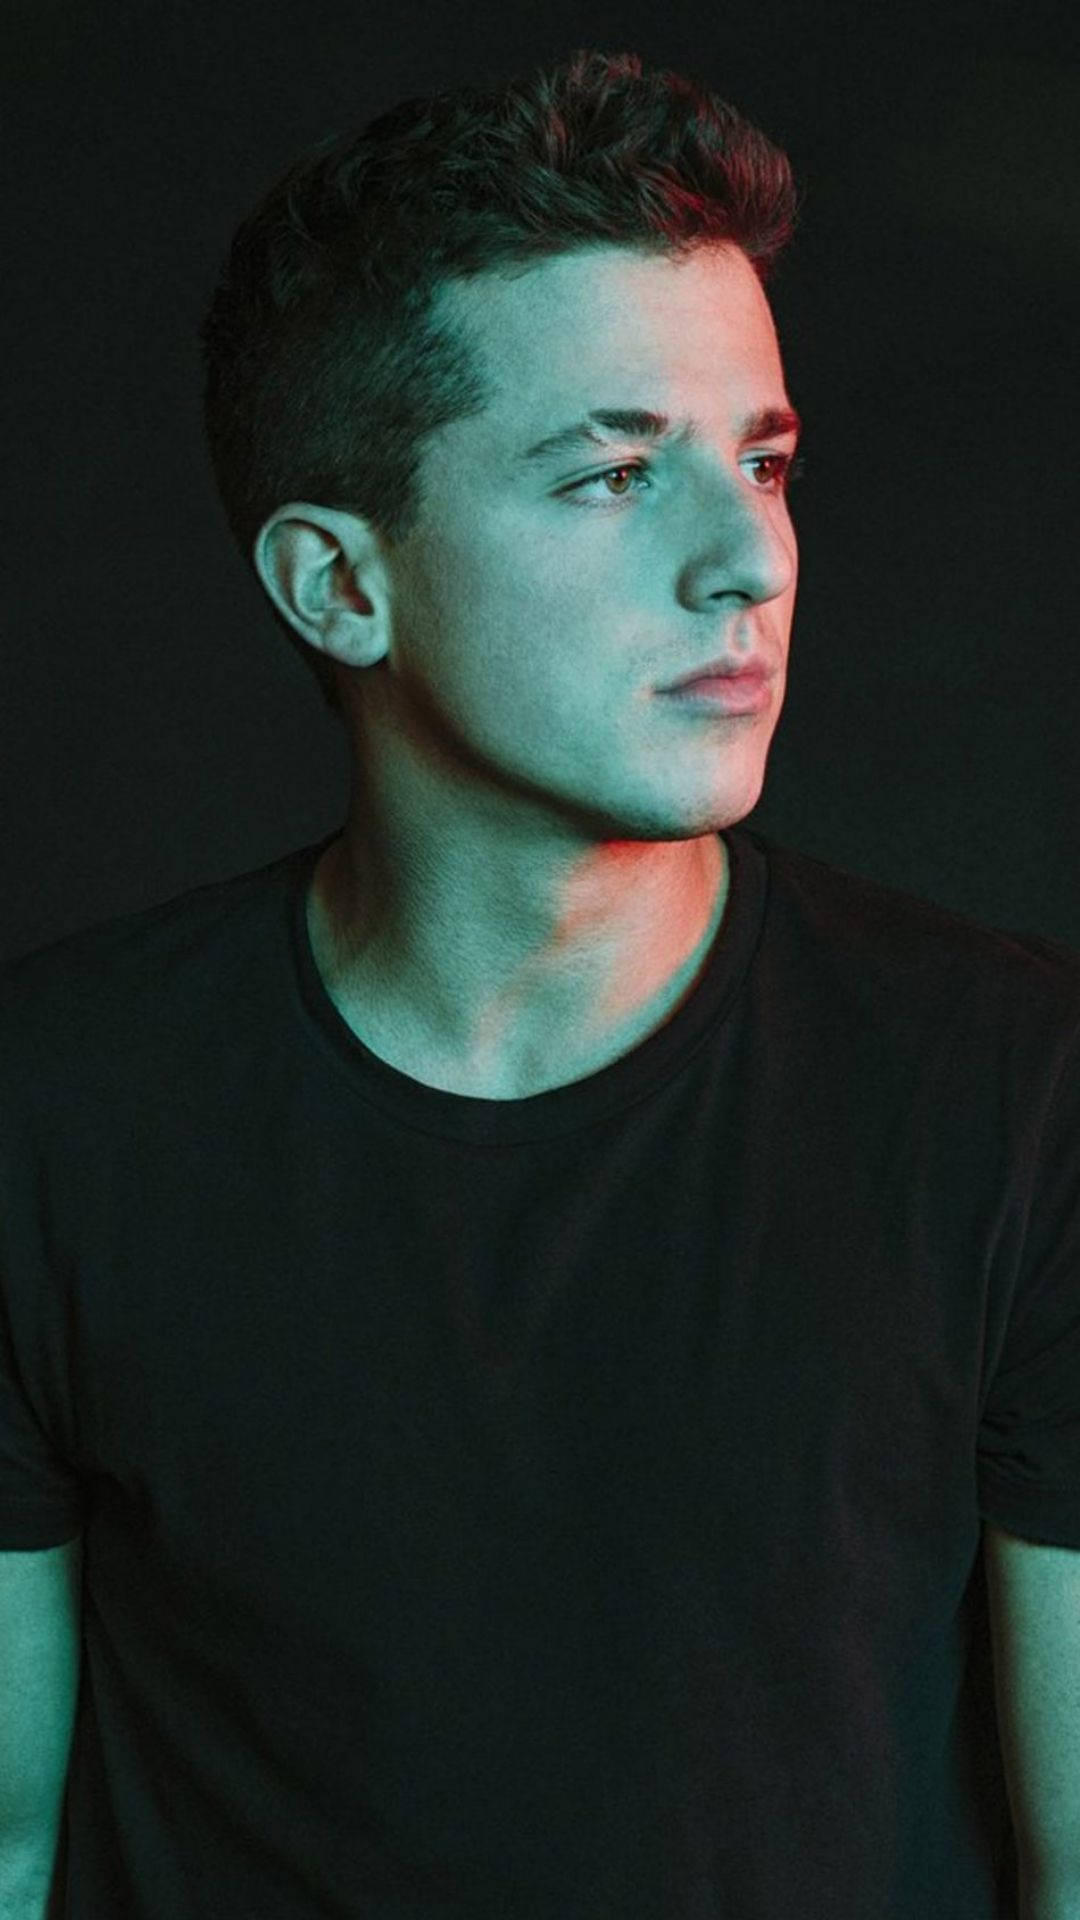 Capturing The Moment - A Candid Side Profile Of Charlie Puth